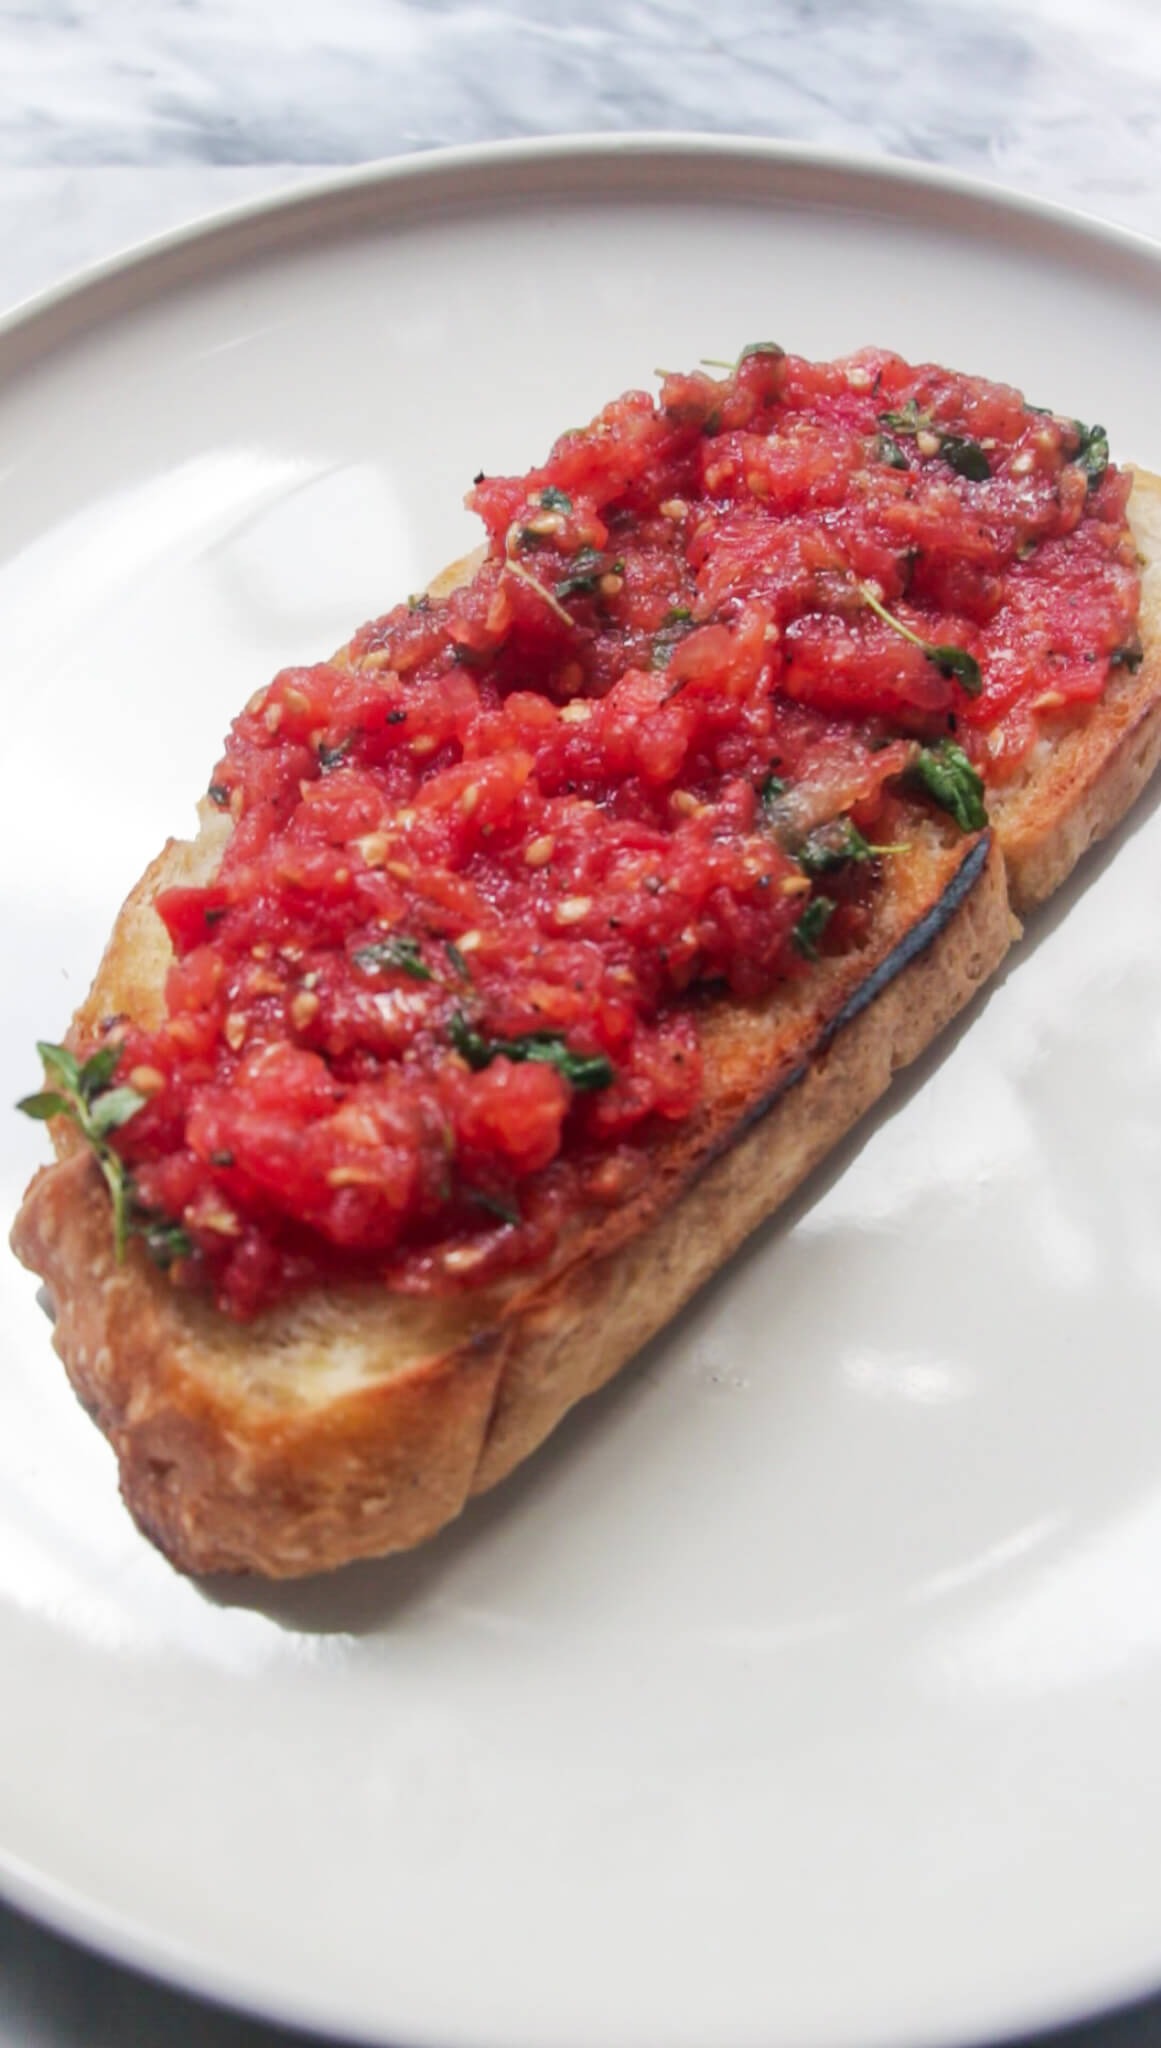 Grated tomato mix on toasted bread.